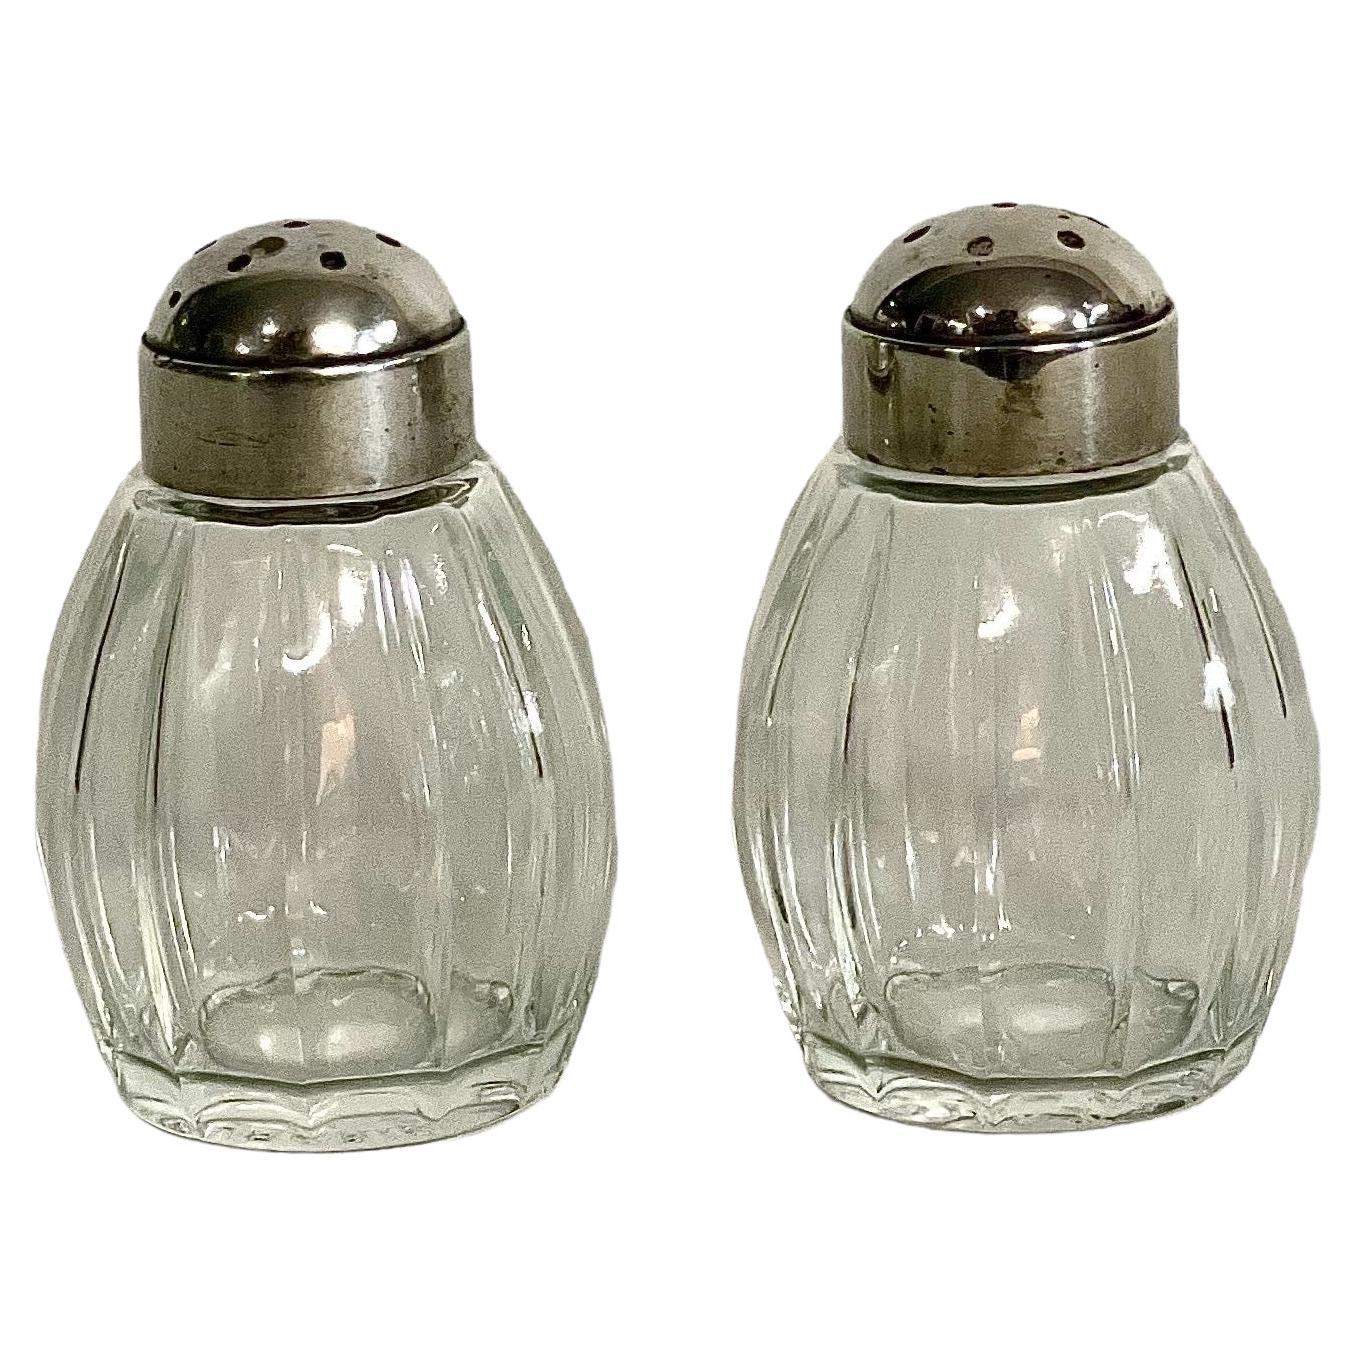 Pair of Christofle Siver and Crystal Salt and Pepper Shaker